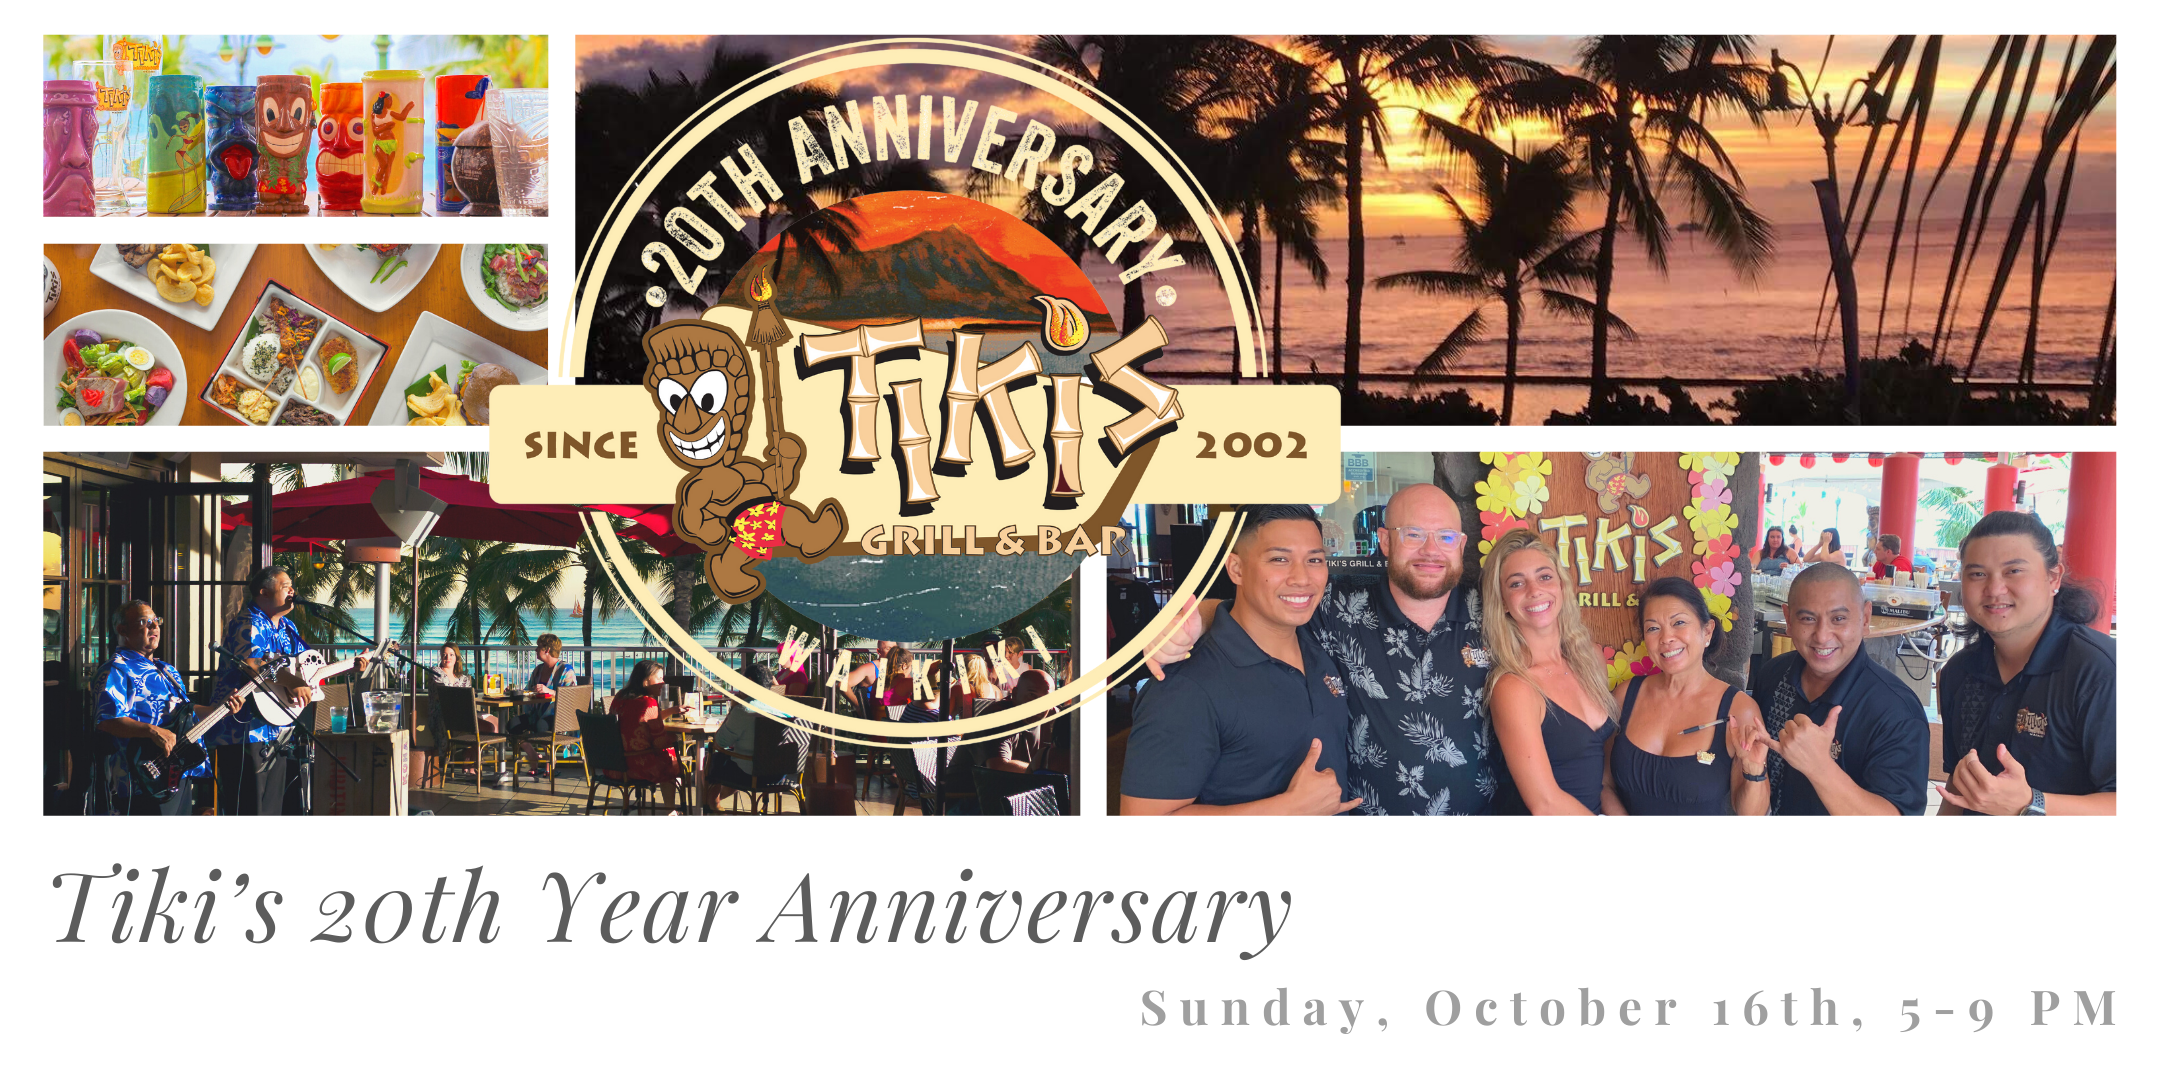 TIKI’S GRILL & BAR: CELEBRATING ITS 20TH ANNIVERSARY WITH FOOD, DRINKS, AND ALOHA